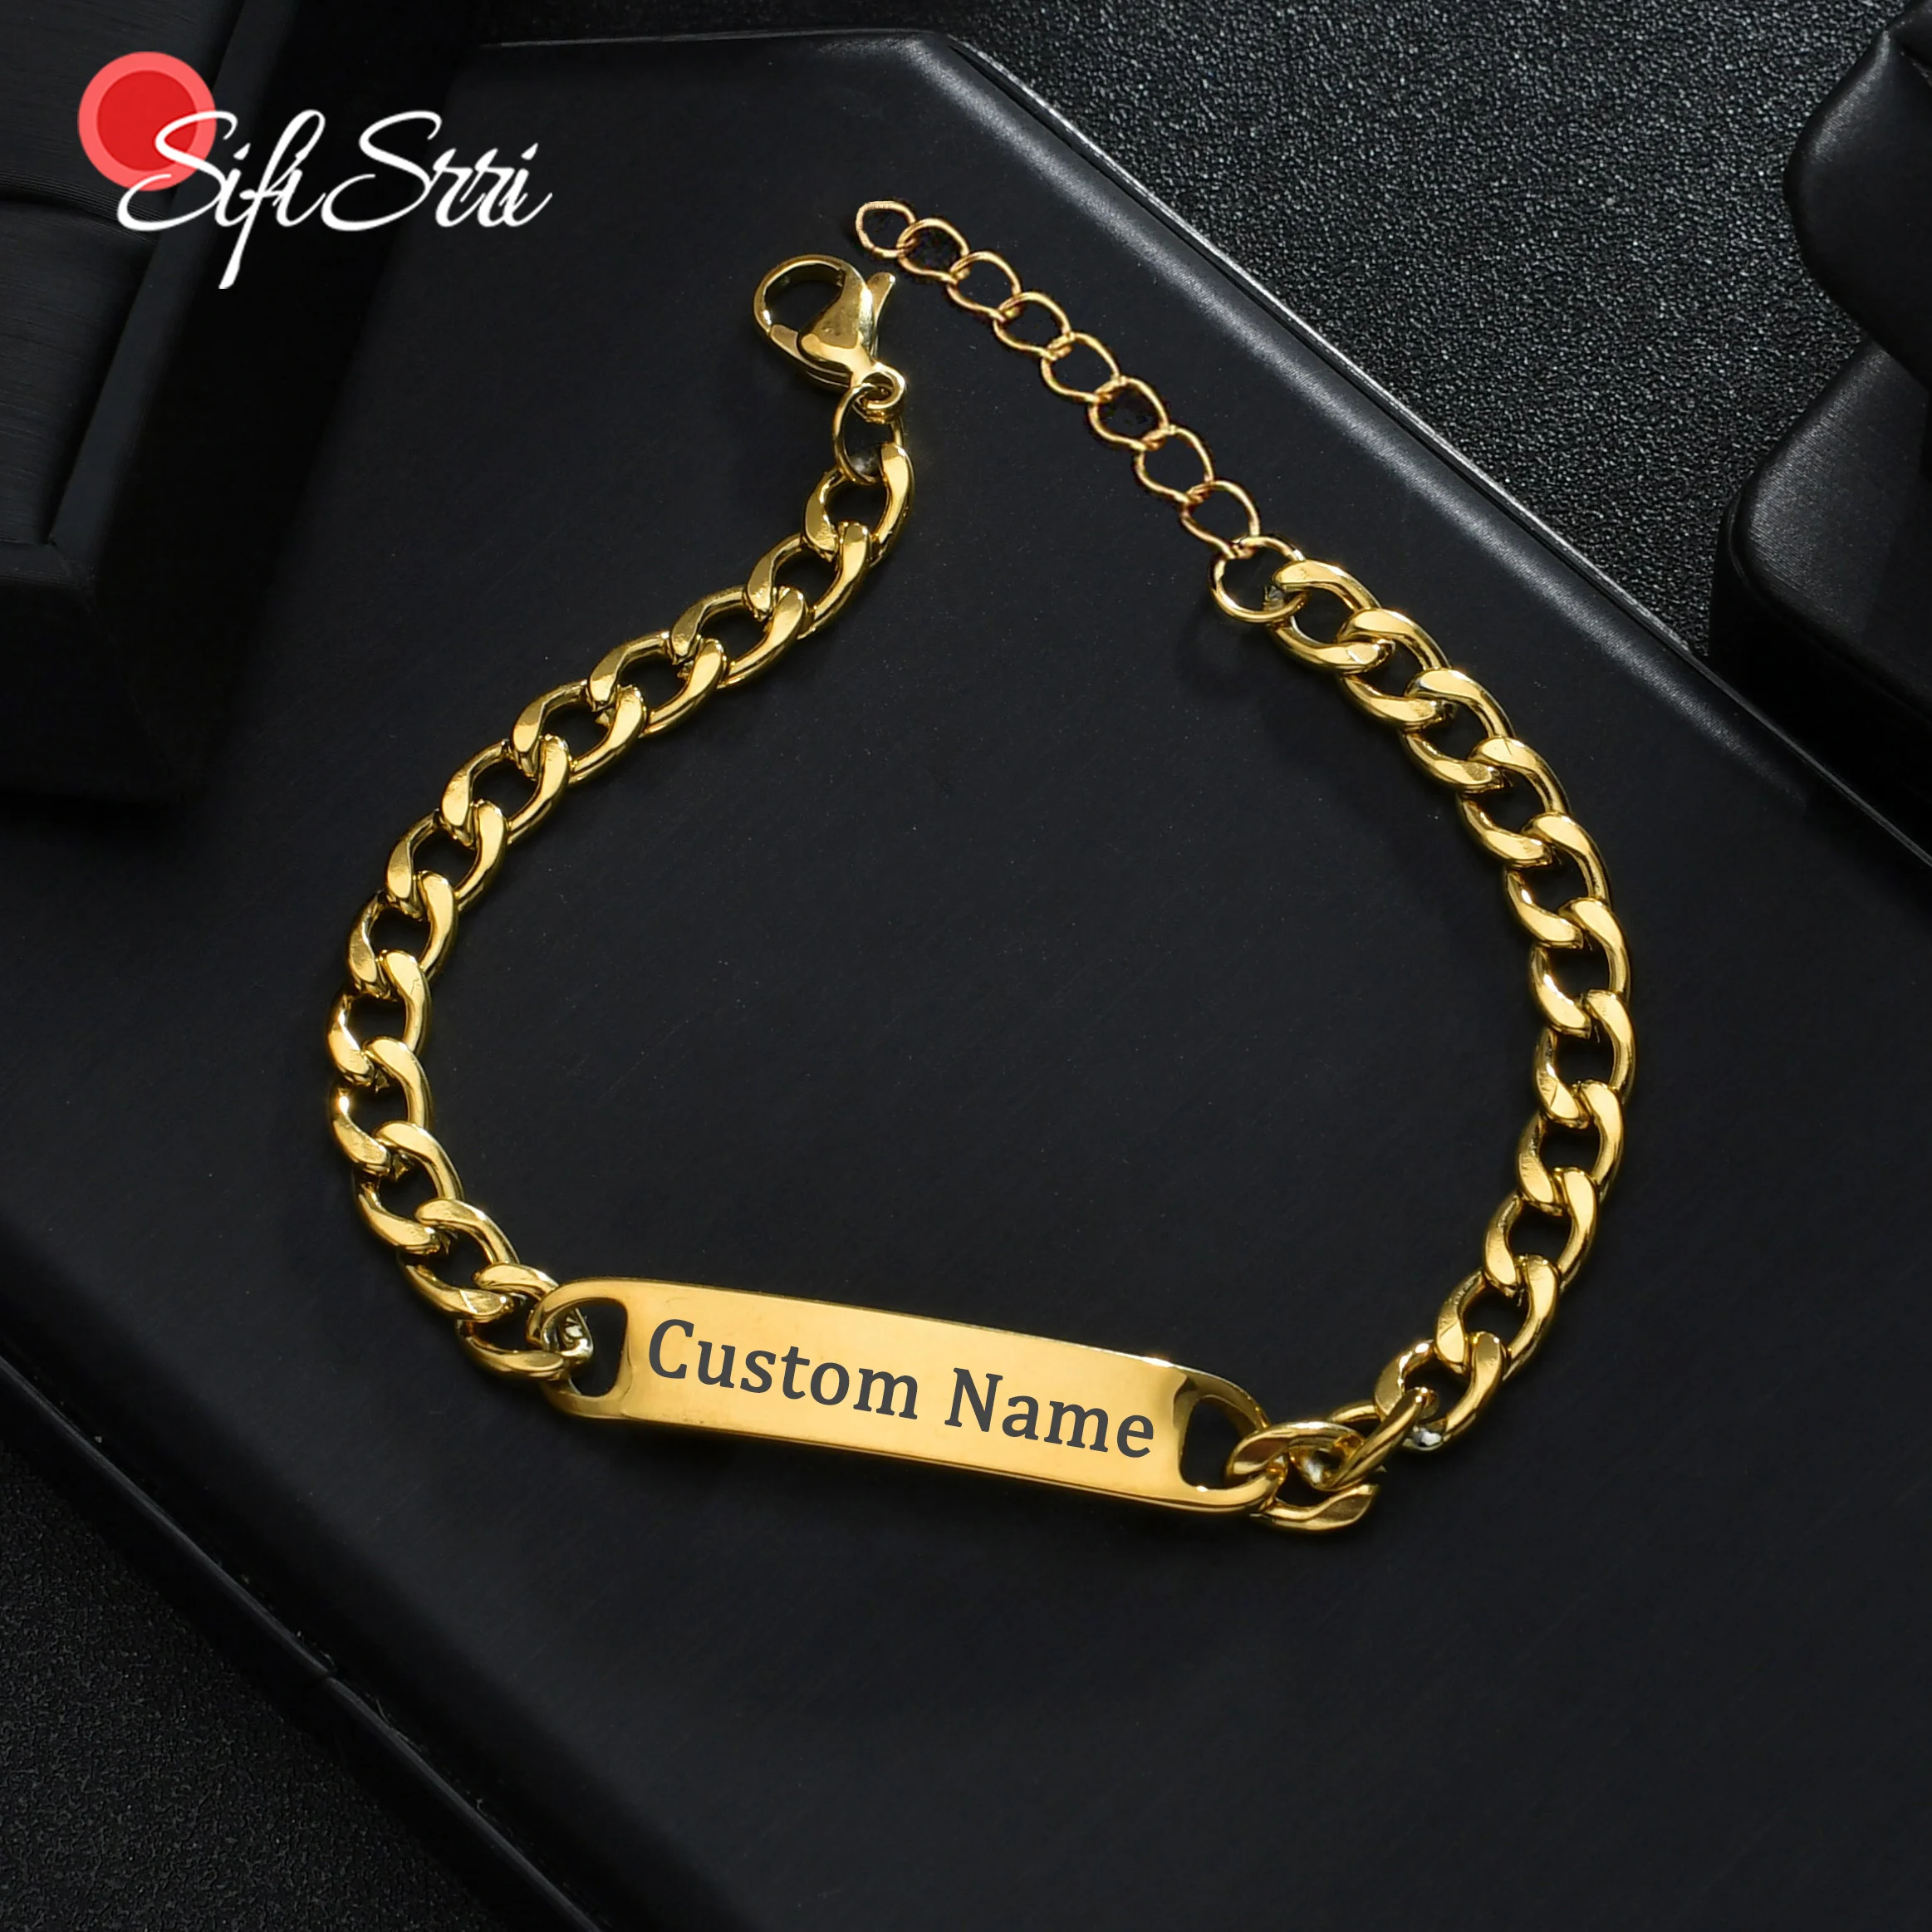 

Sifisrri Engrave Name Bracelet For Women Men Stainless Steel Adjustable Cuban Chain Boys Personalized Custom Date Jewelry Gift